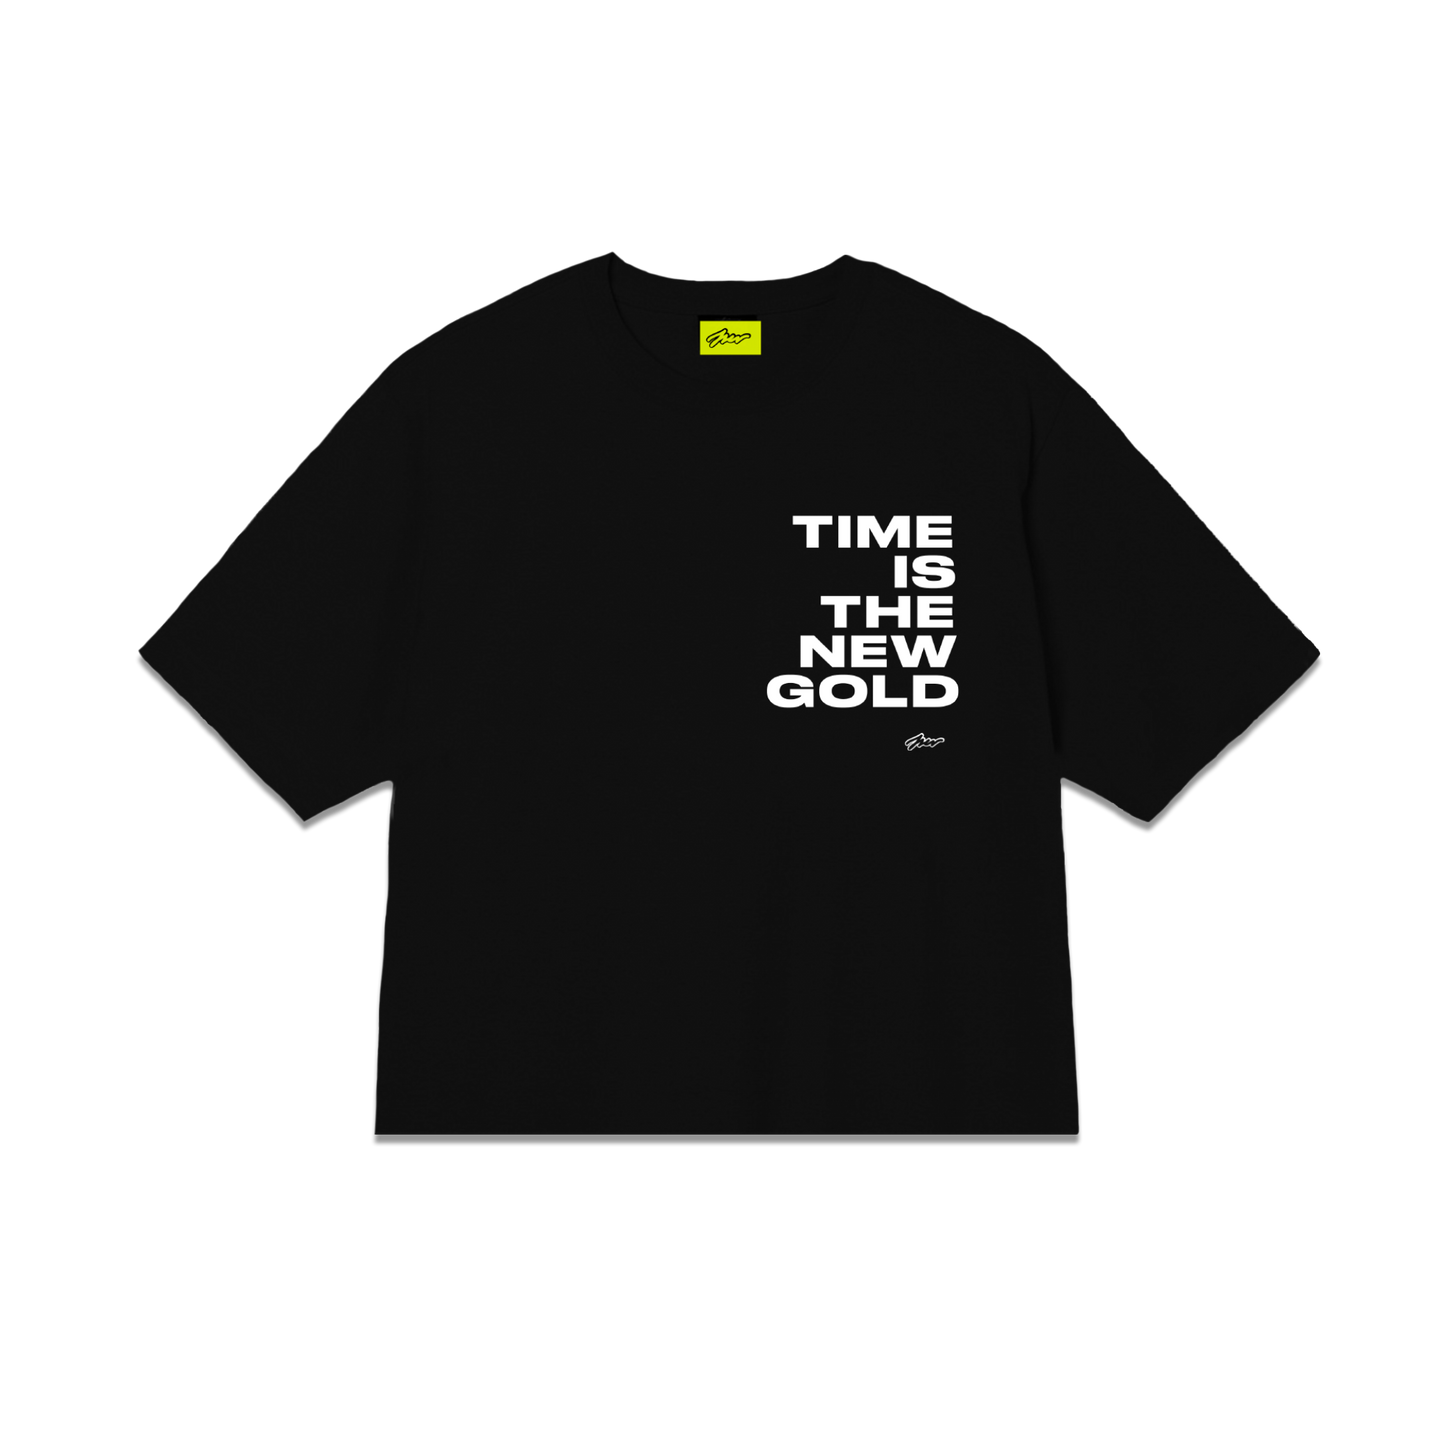 TIME IS THE NEW GOLD front